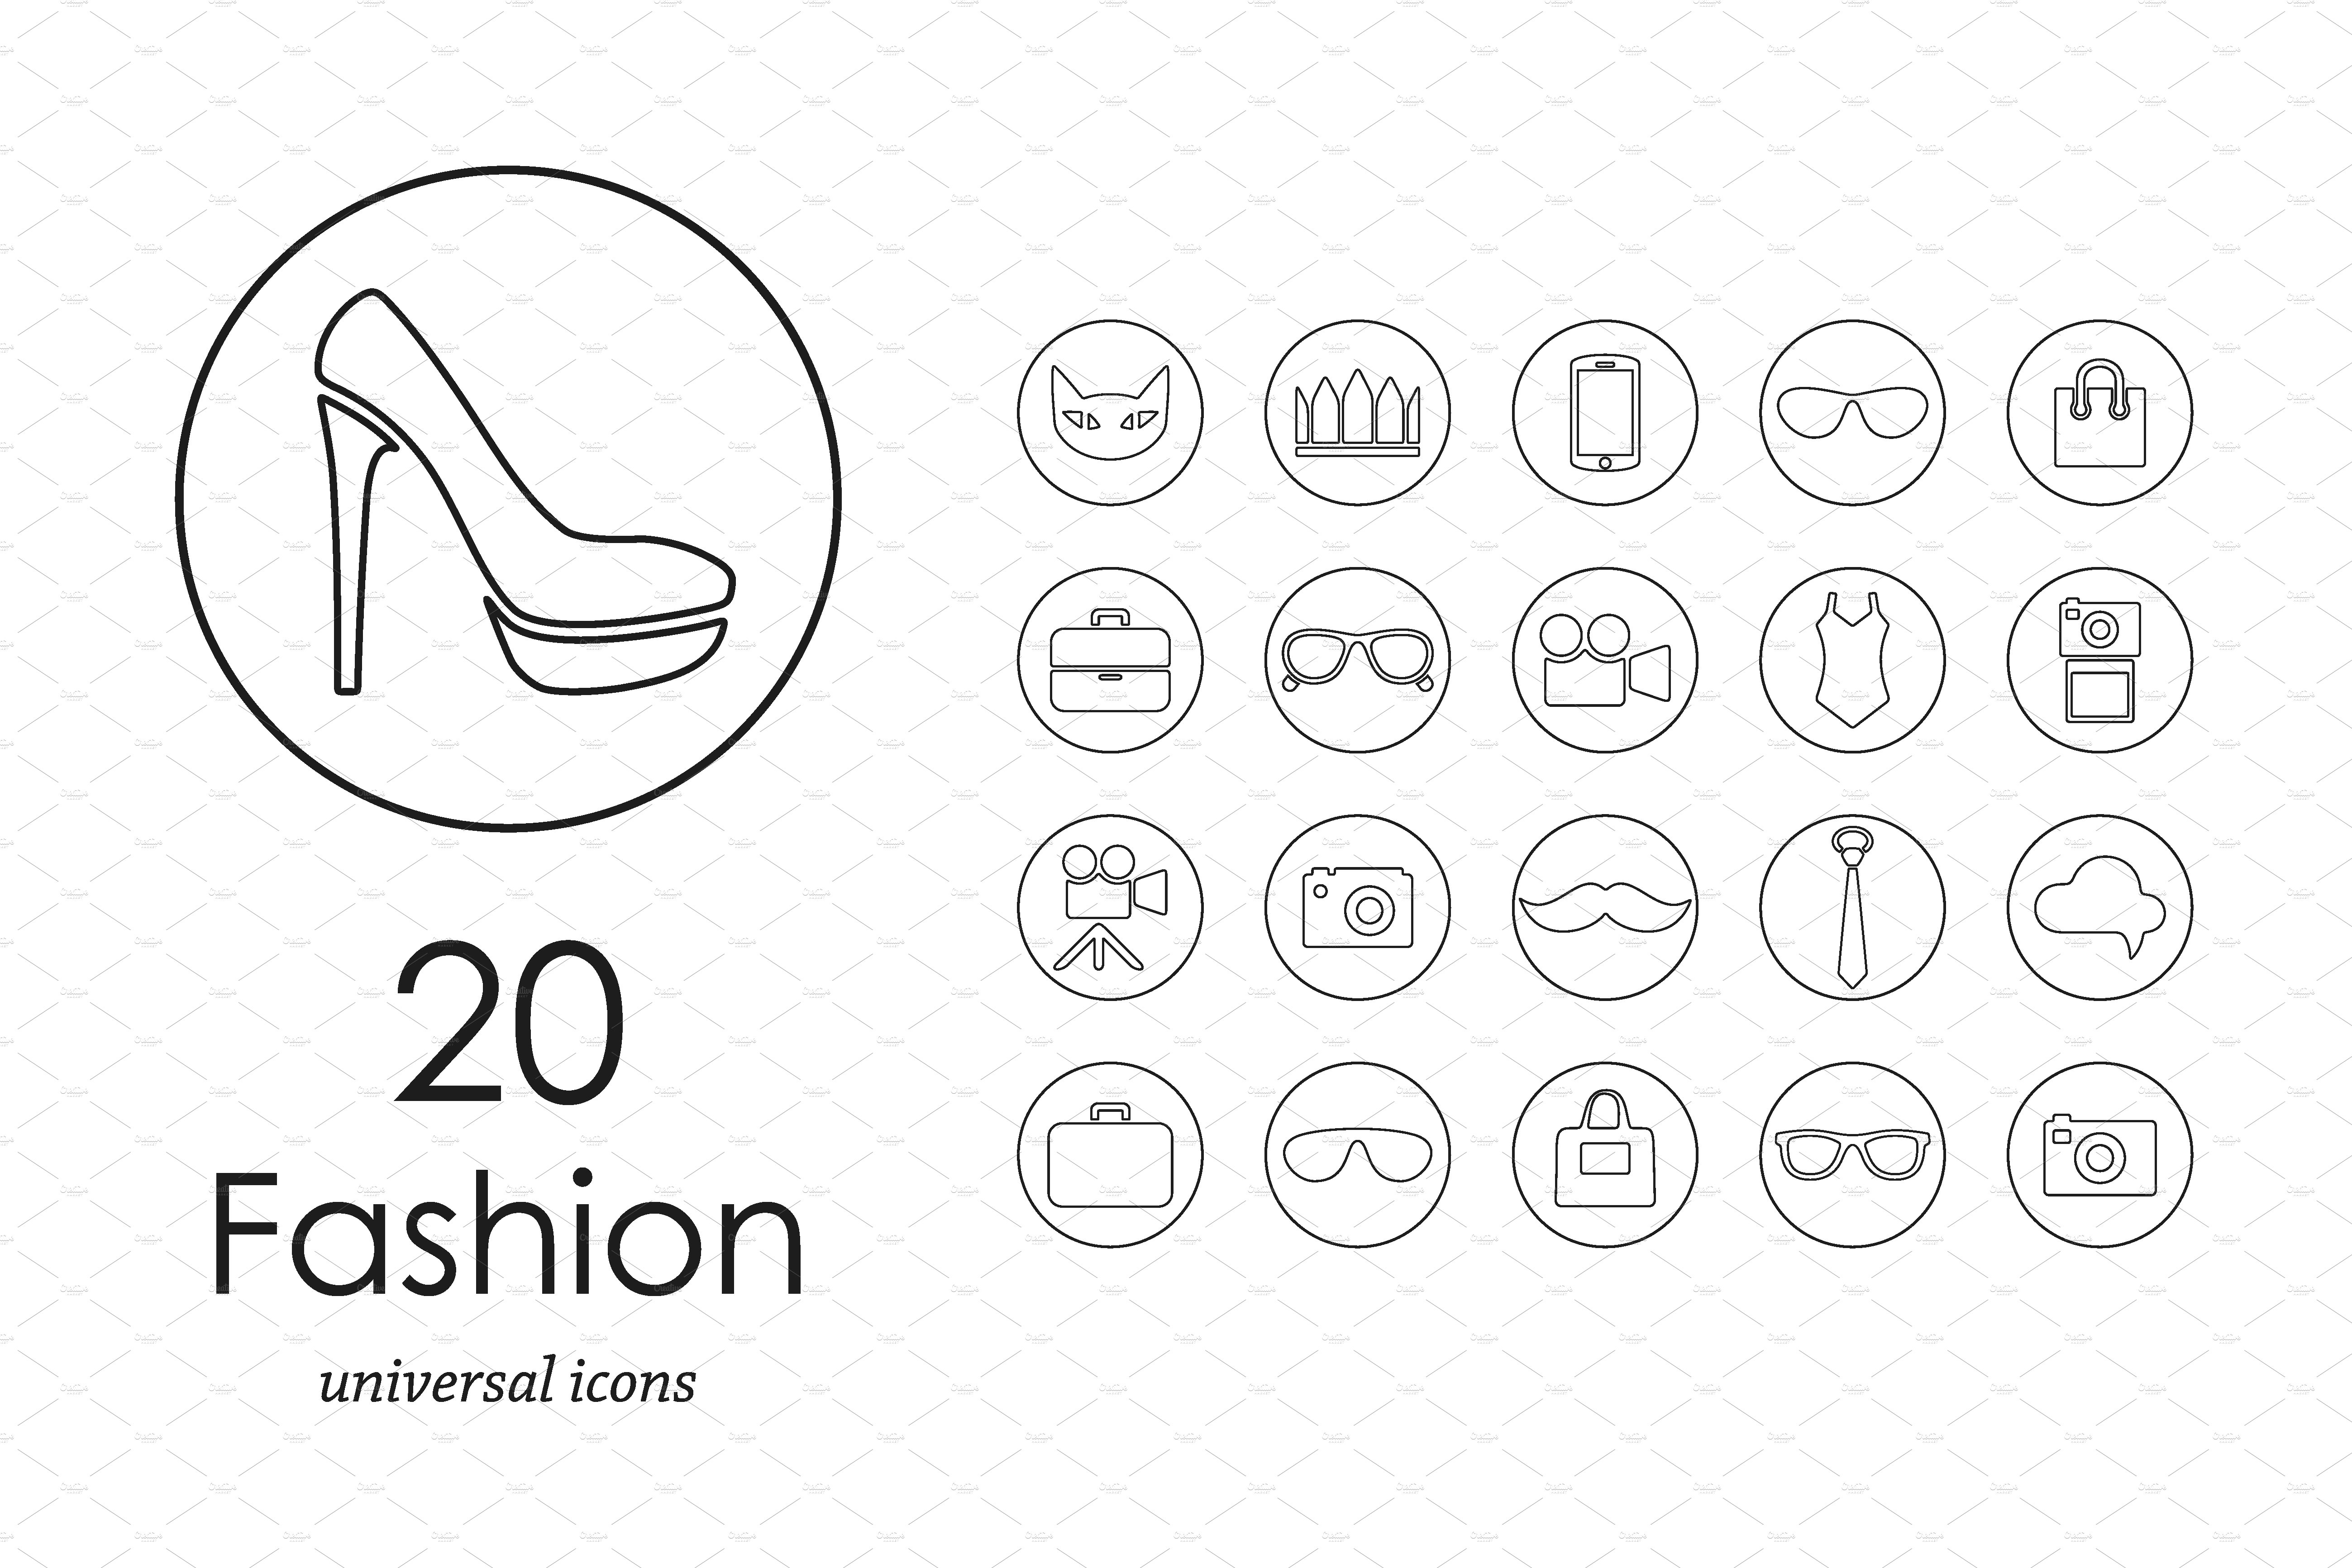 20 fashion icons preview image.